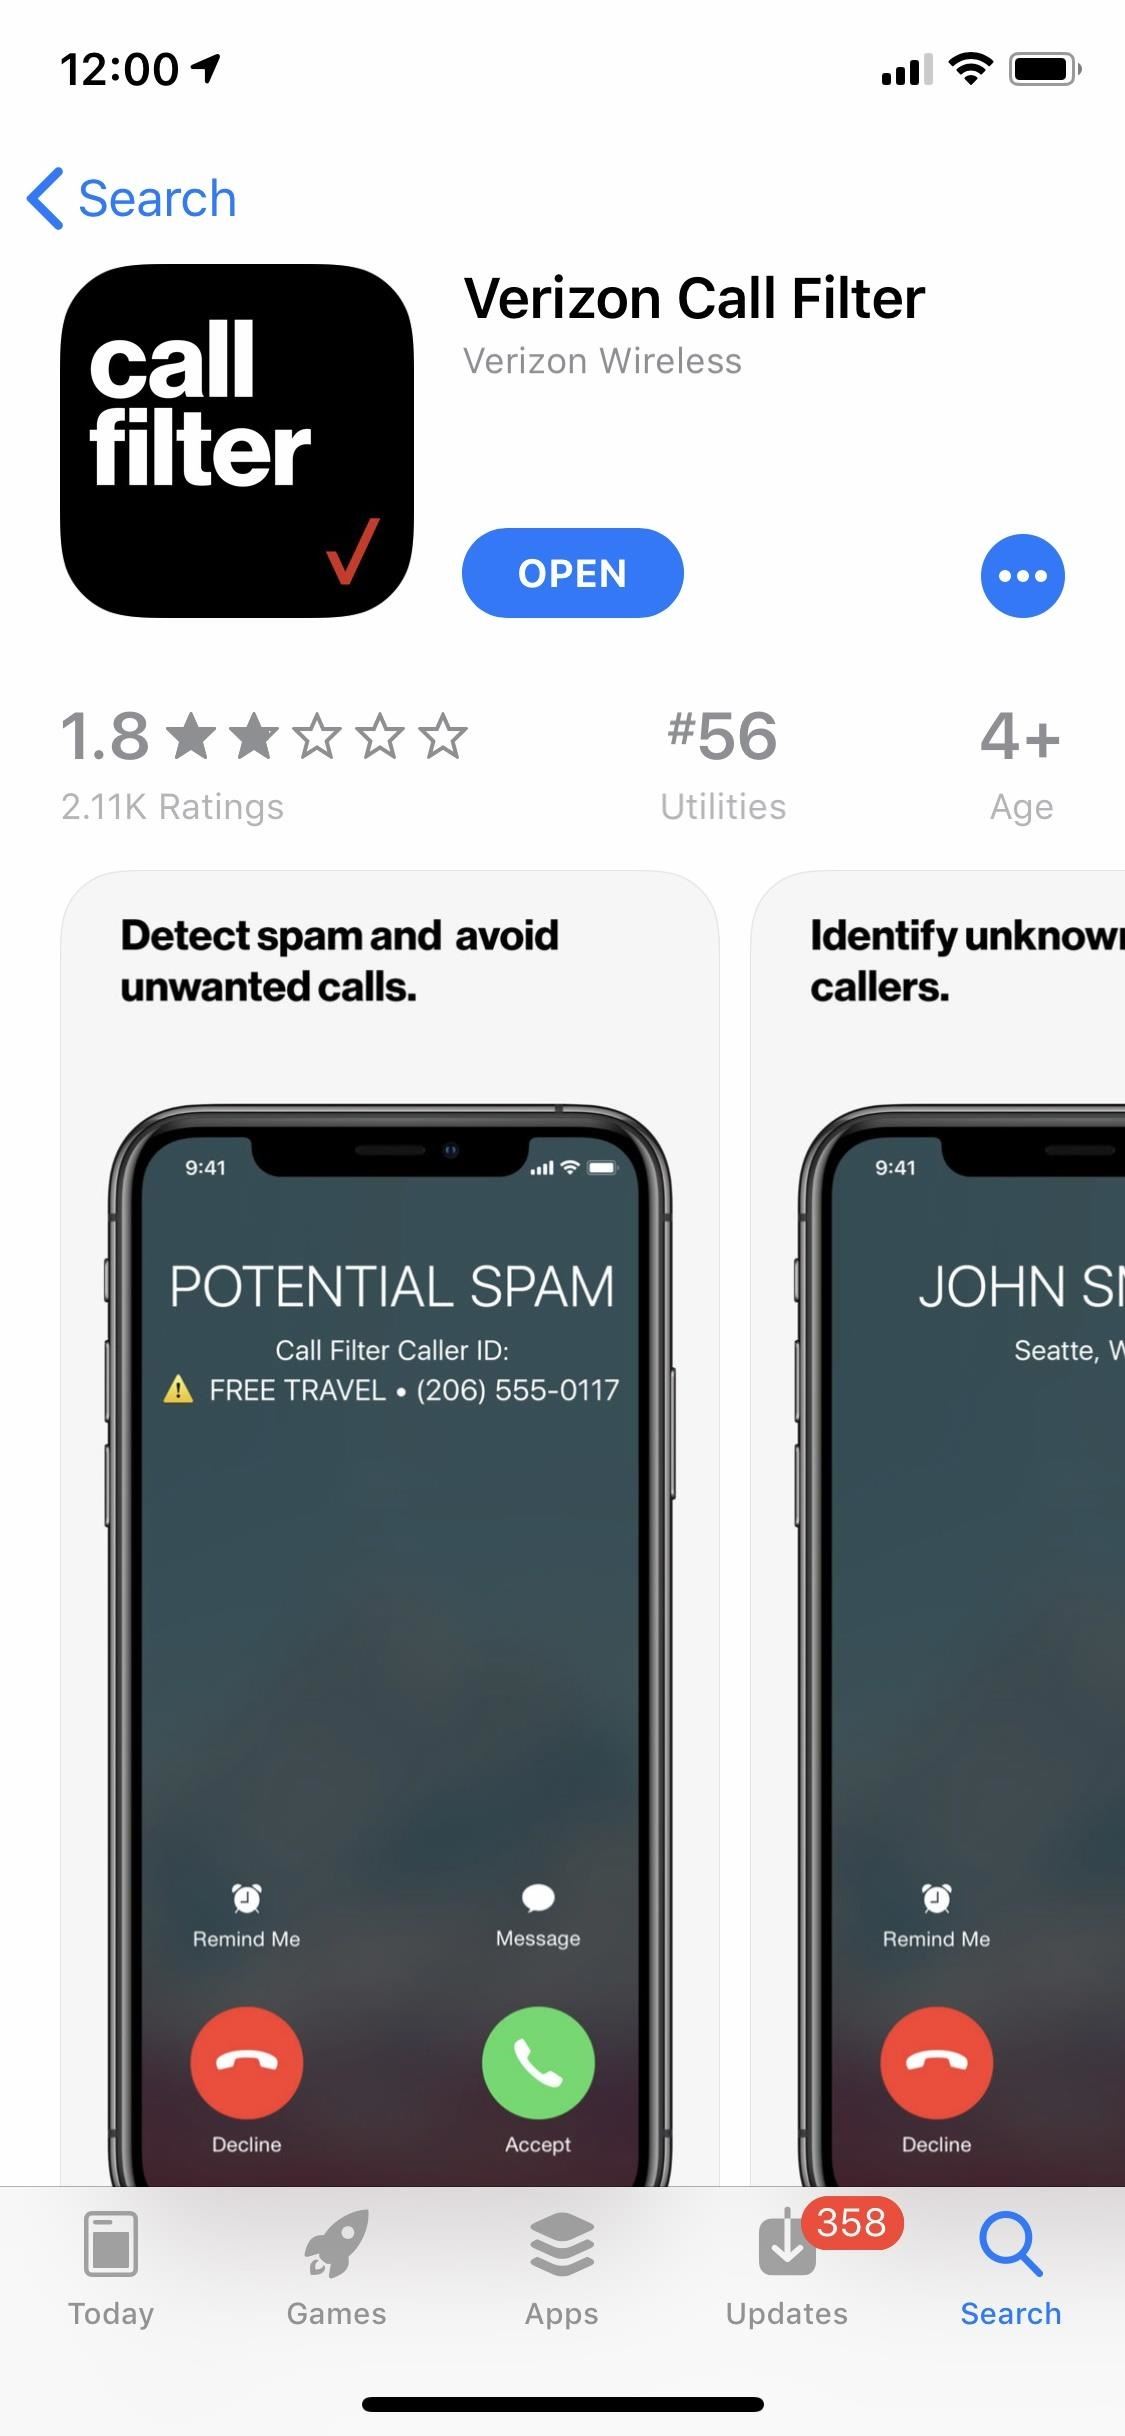 How to Block Spoofed Numbers & Robocalls on Any Phone with Verizon, AT&T, T-Mobile, or Sprint